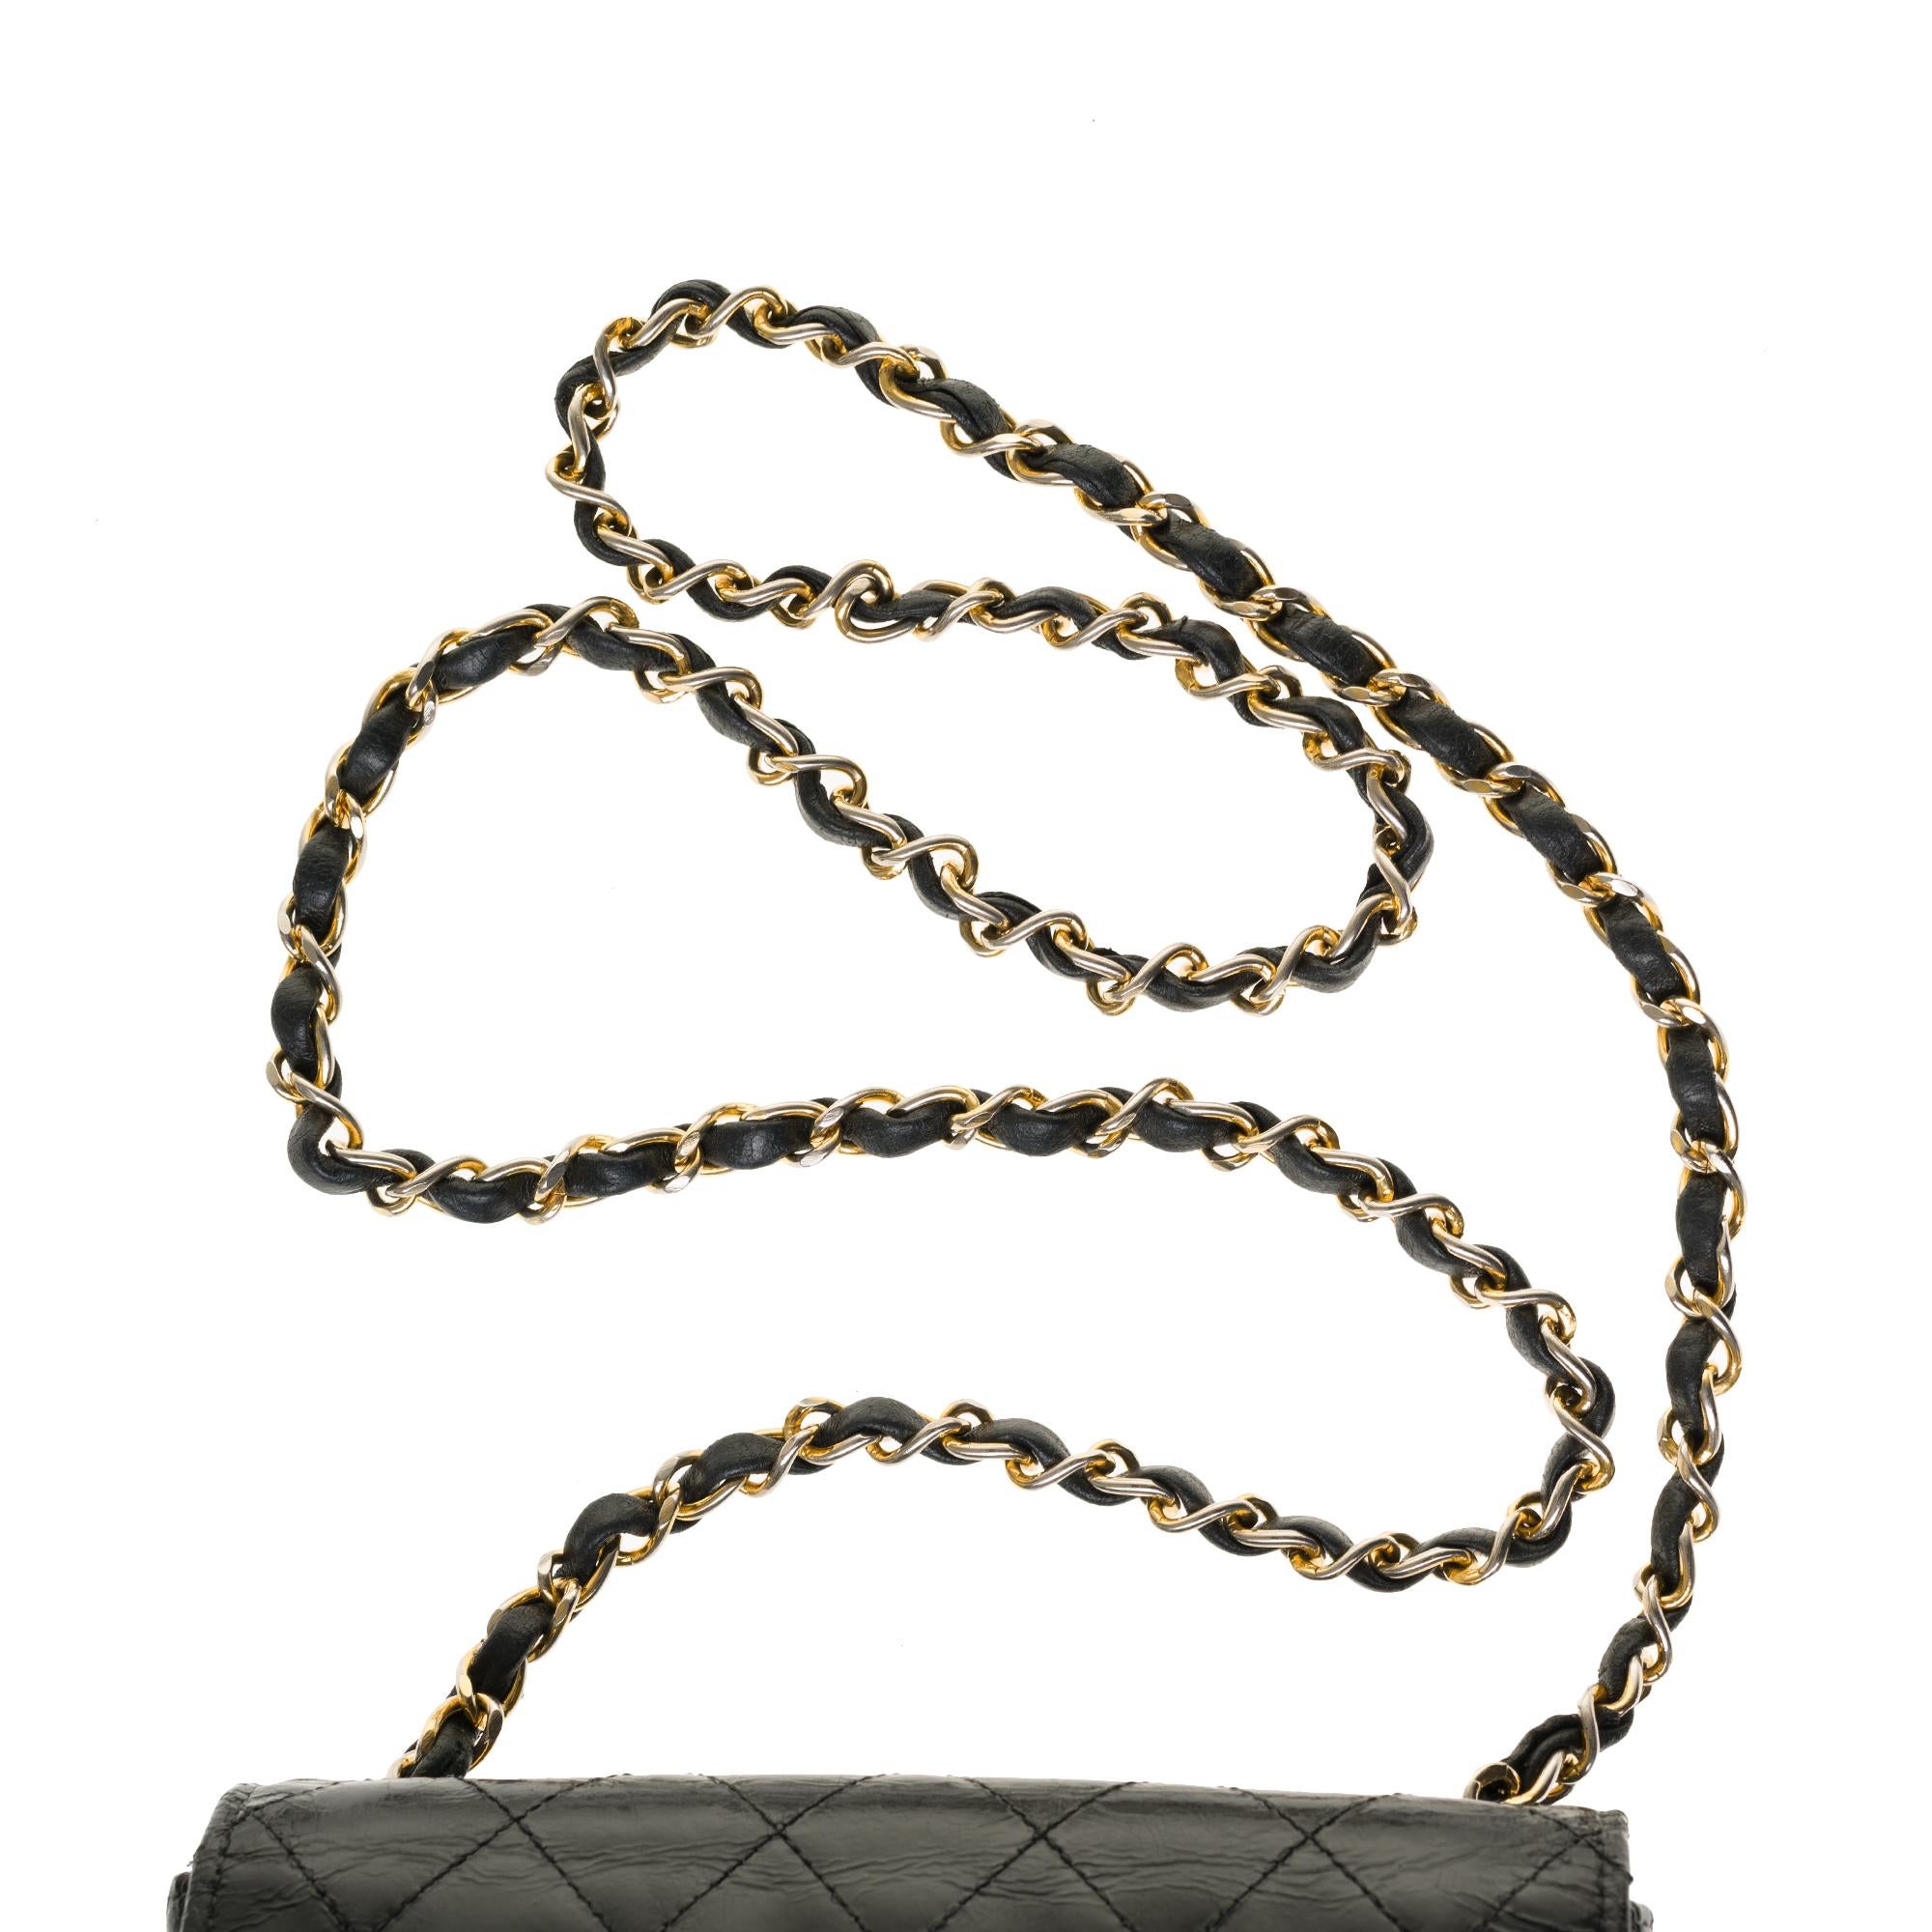 Women's Chanel Mini square handbag in black quilted patent leather, gold hardware